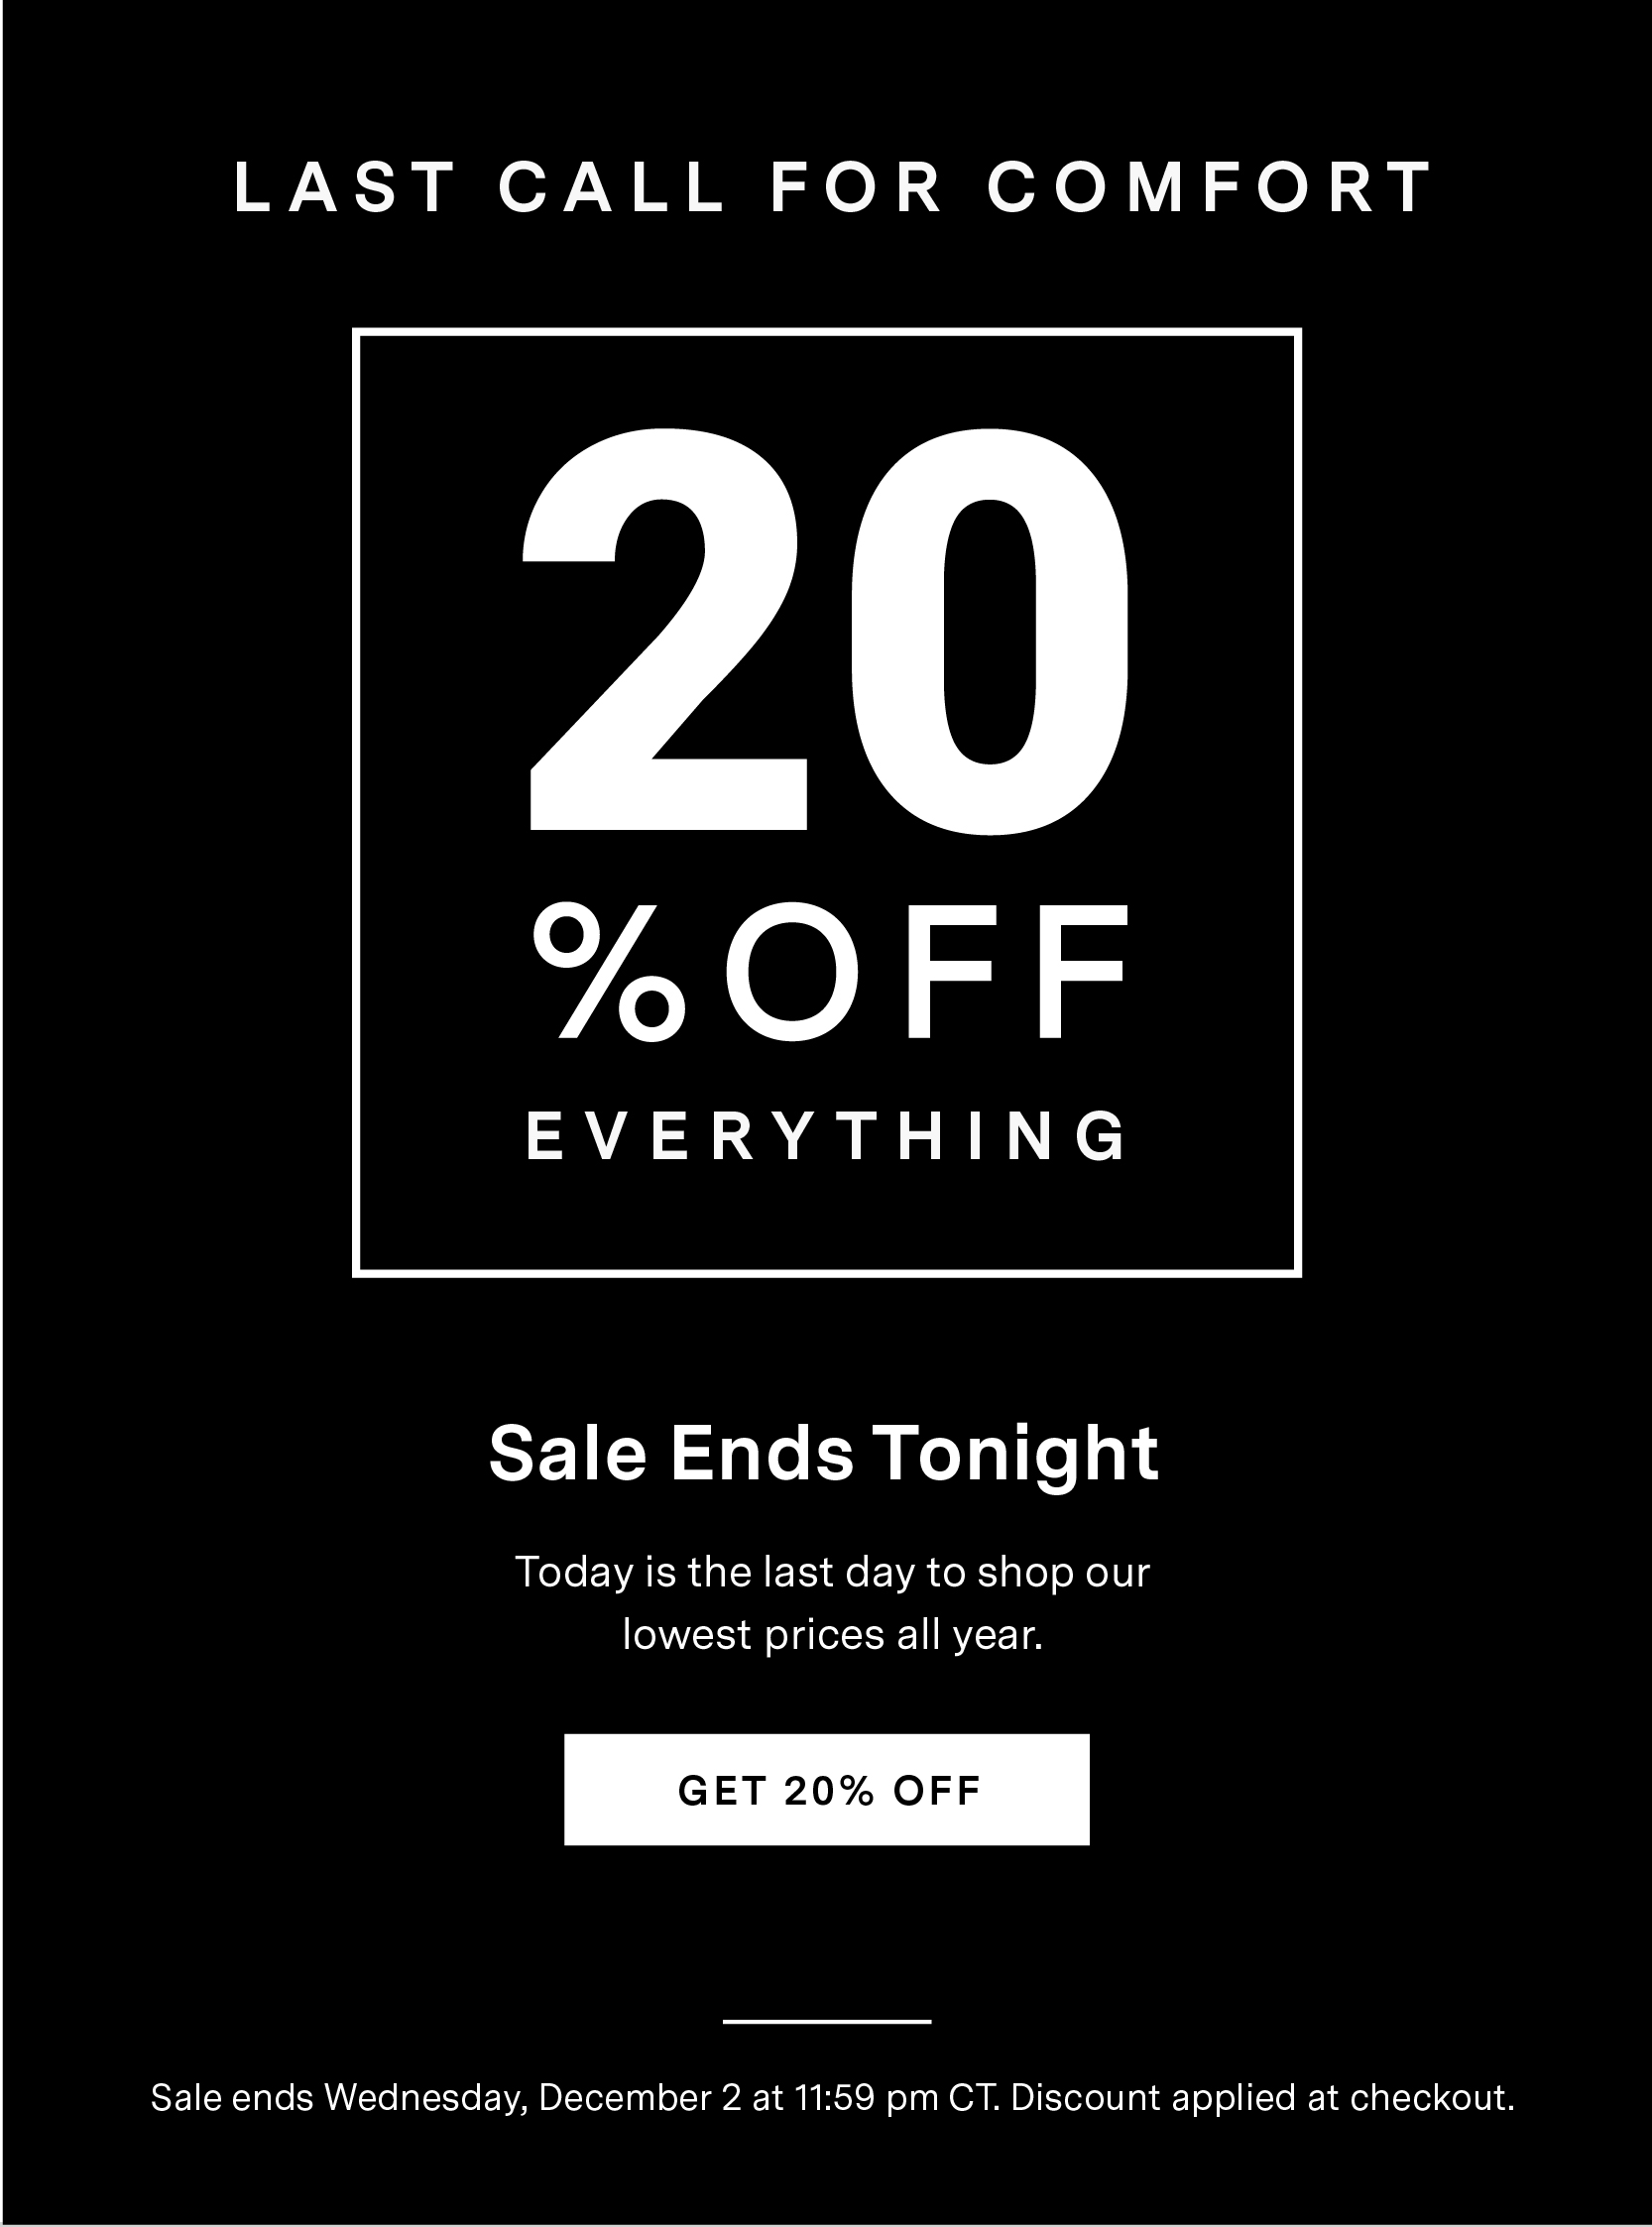 LAST CALL FOR COMFORT  20% OFF  		Everything   Sale Ends Tonight Don't wait. Today is the last day to shop at our lowest price all year. Sale ends Wednesday, December 2 at 11:59 pm CT. Discount applied at checkout. 